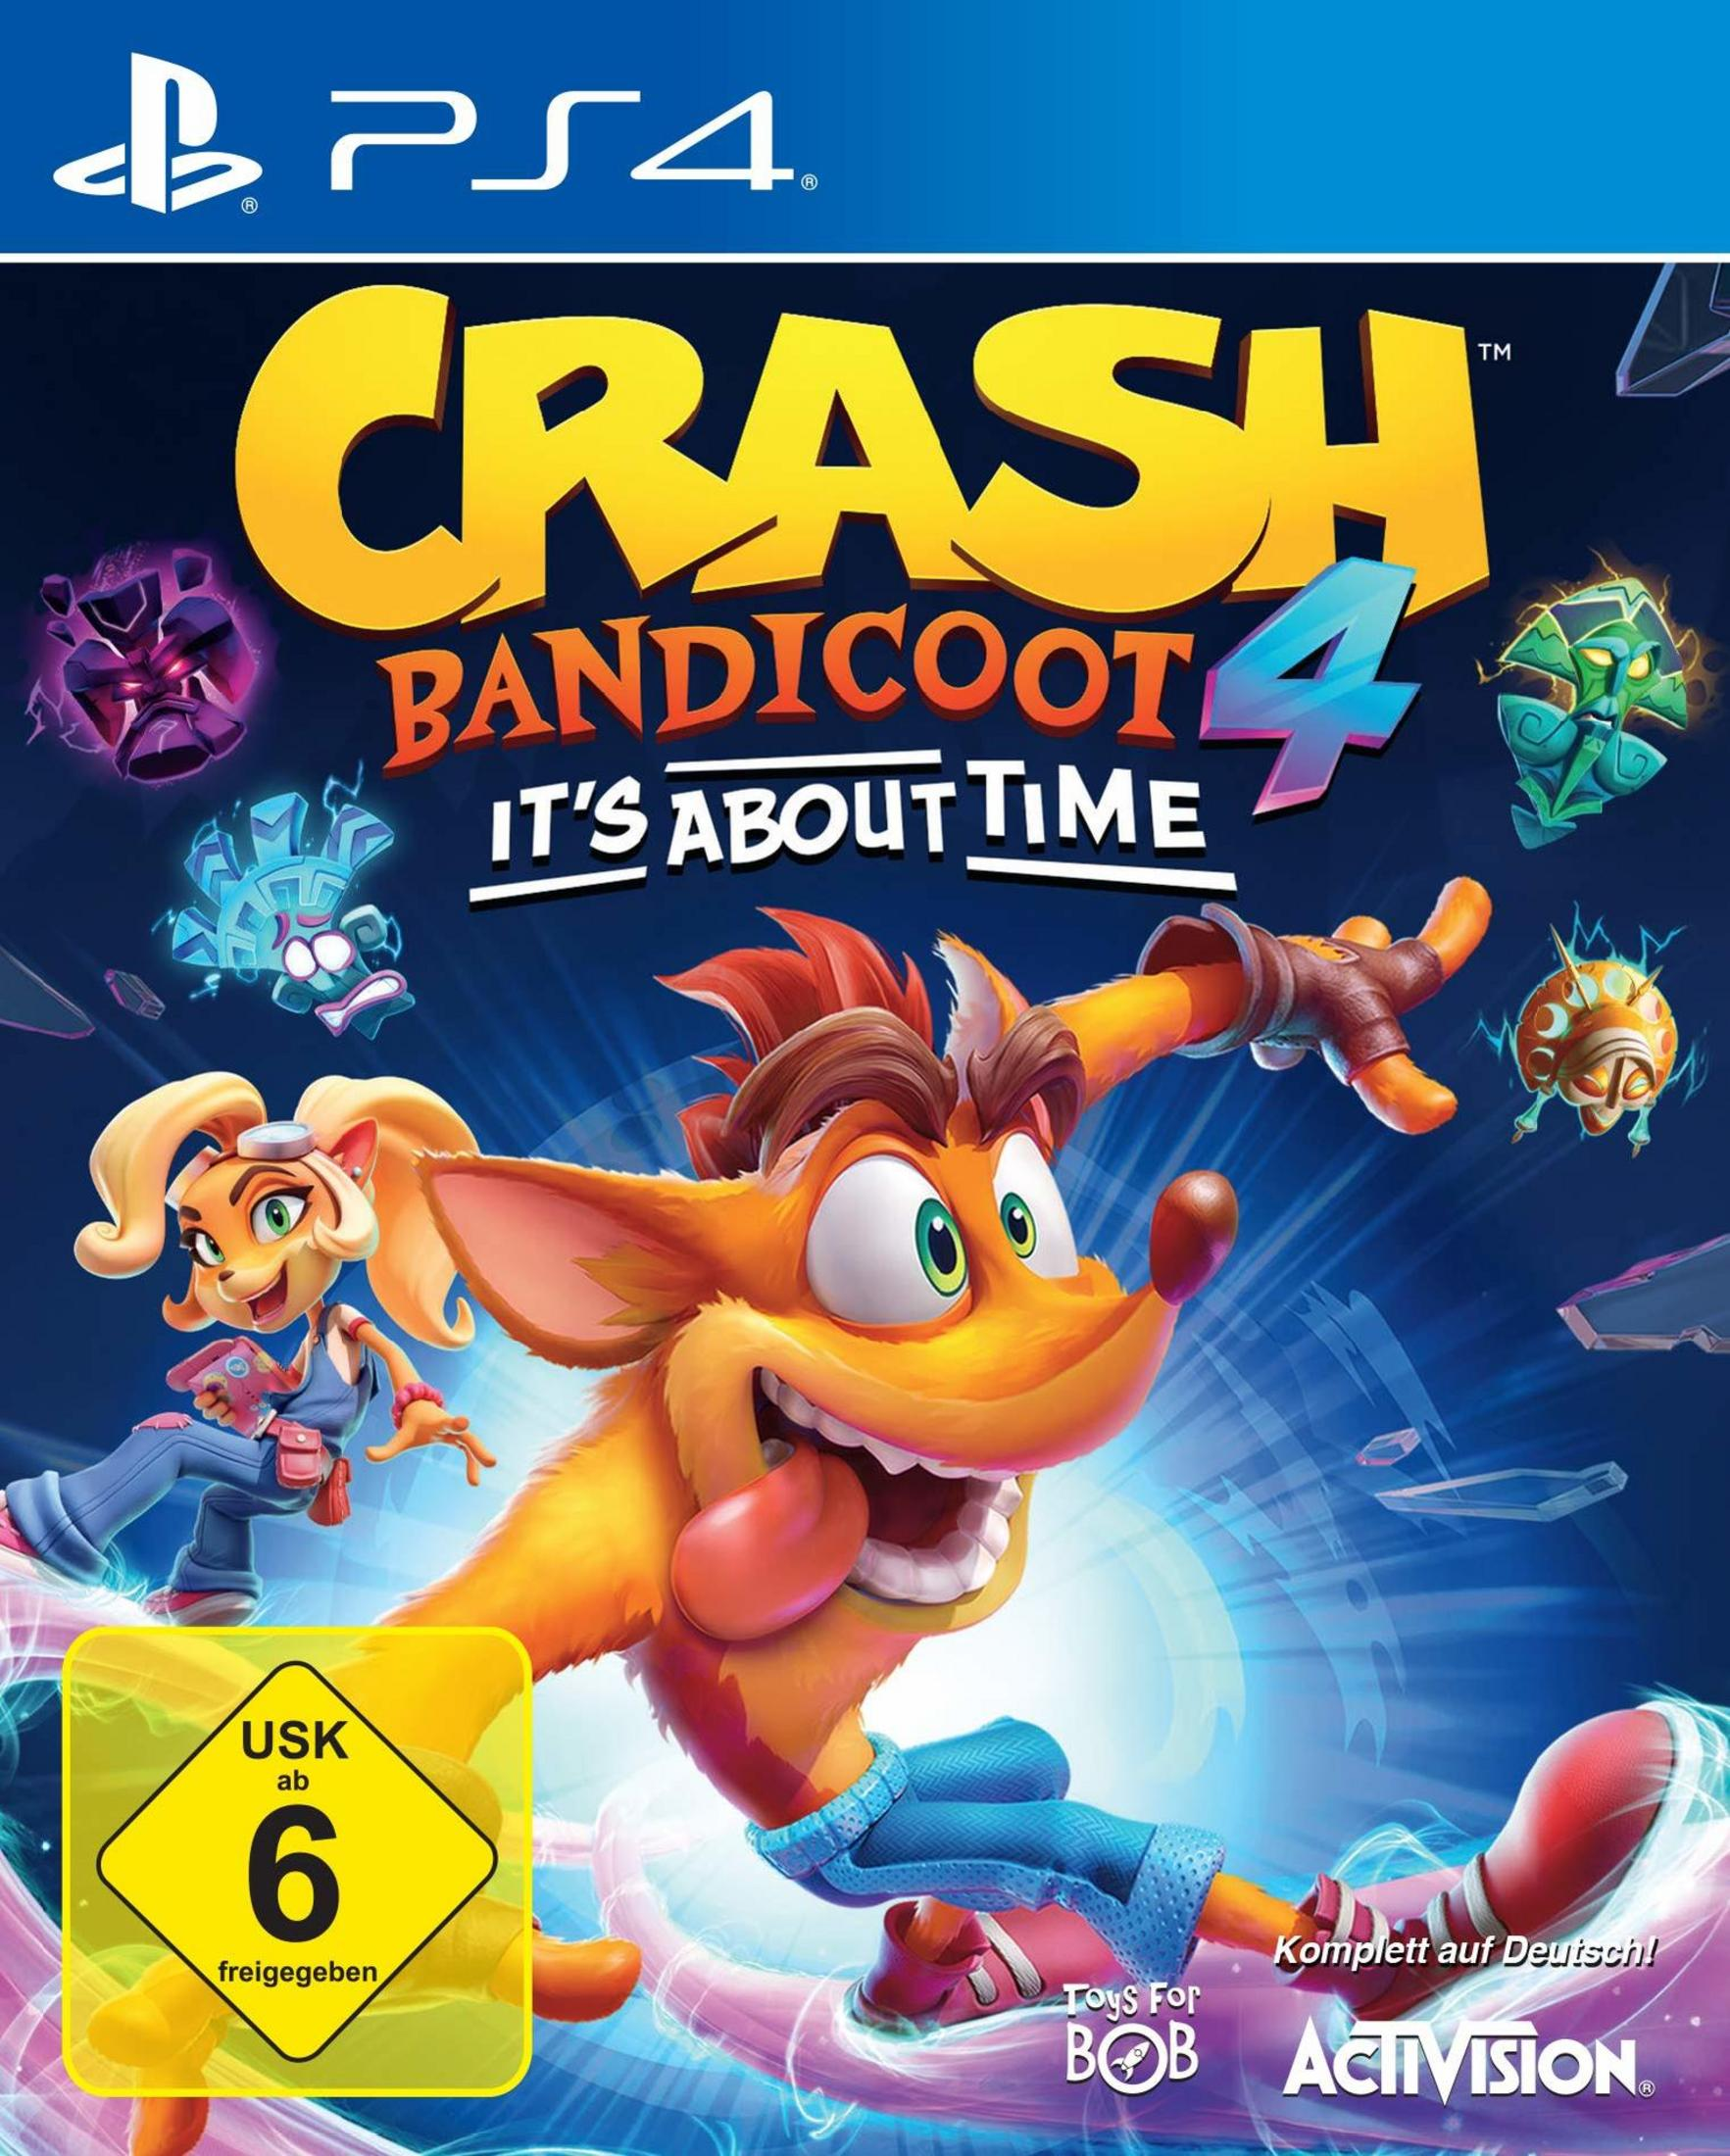 Crash Bandicoot 4 - [PlayStation Time About It´s - 4